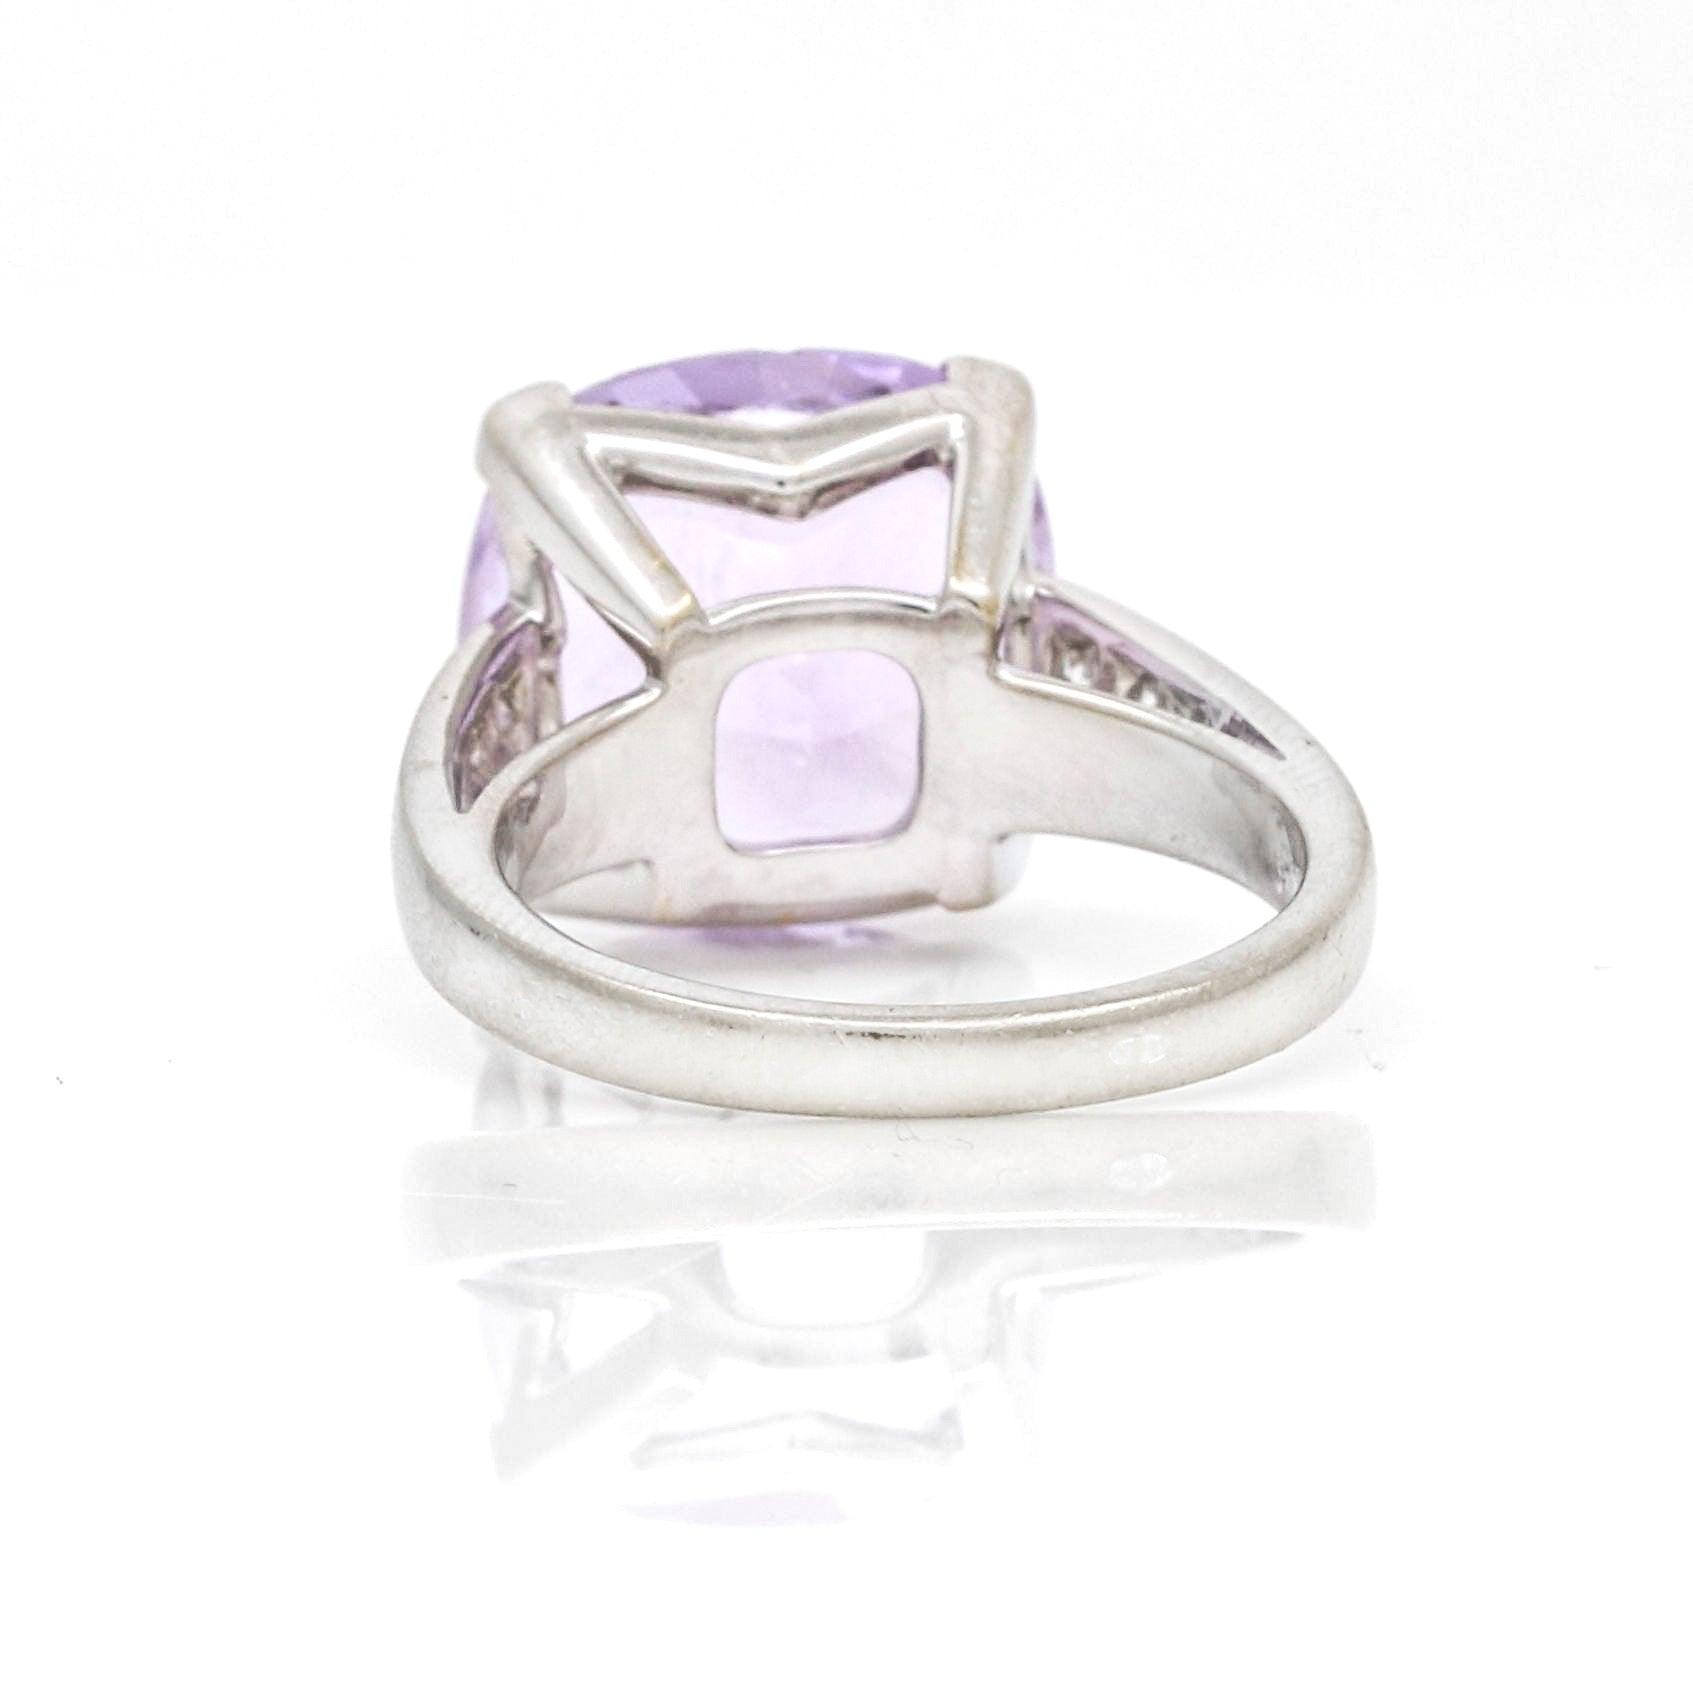 Mauboussin Gueule d'Amour Rose de France Gemstone Diamond Ring in 18k White Gold - 31 Jewels Inc.